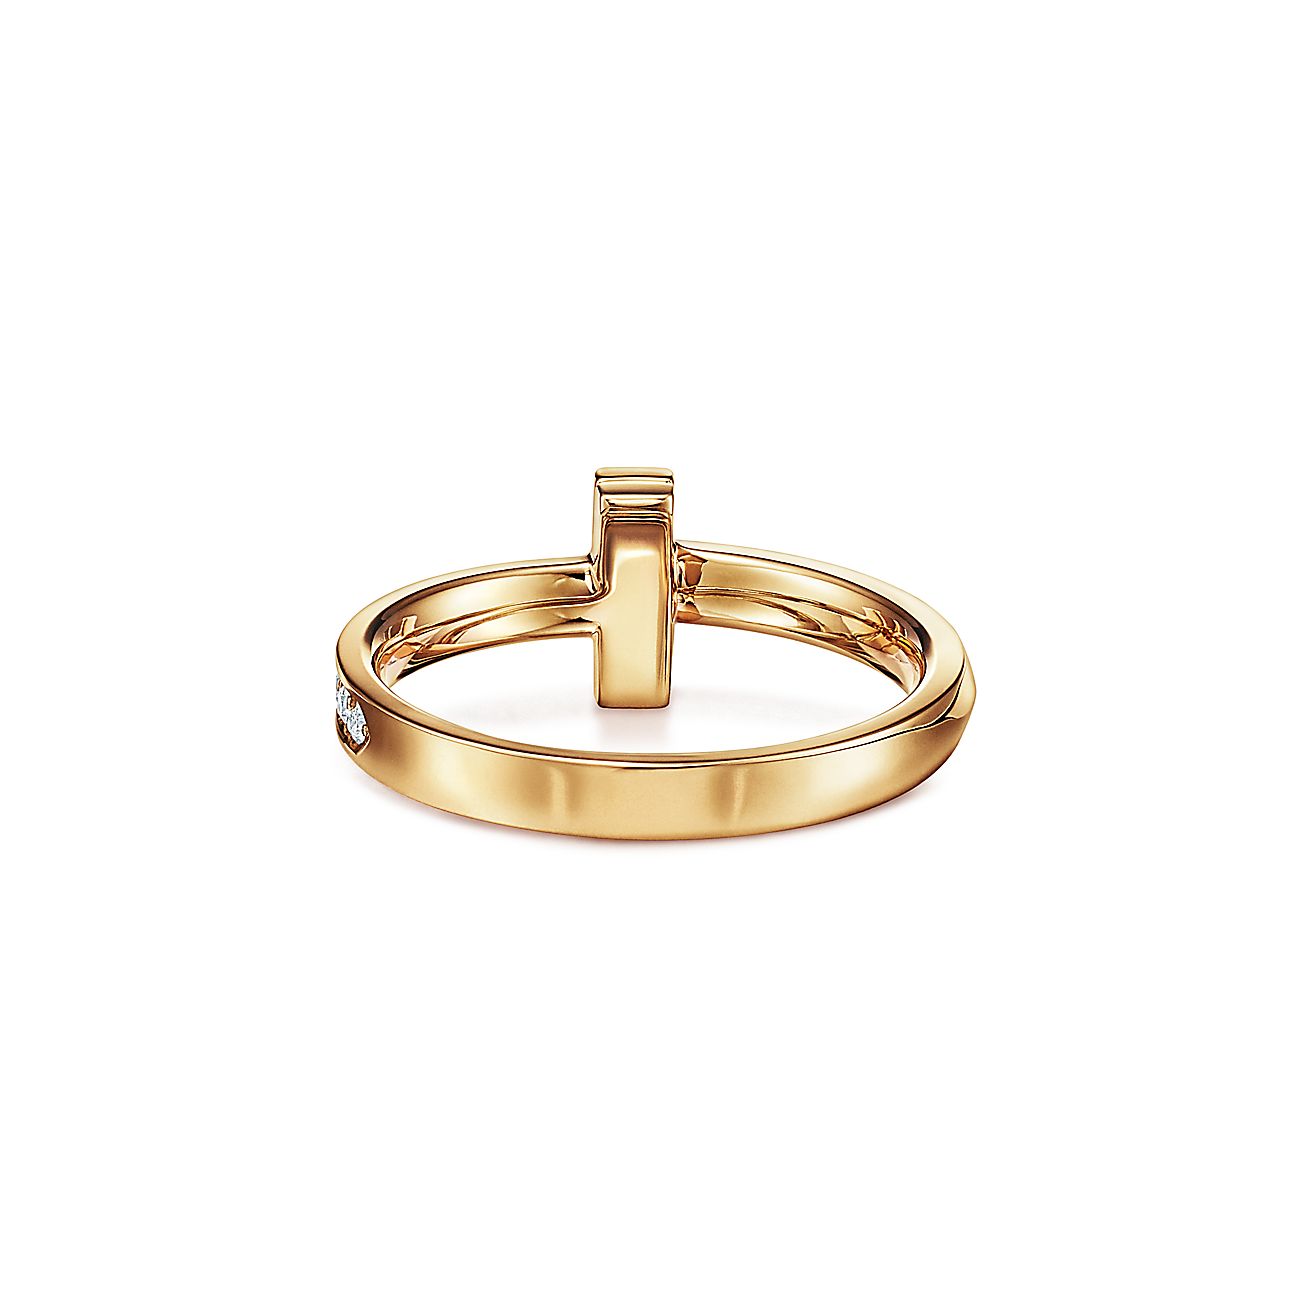 Tiffany T T1 Ring in Yellow Gold with Diamonds, 2.5 mm Wide | Tiffany & Co.